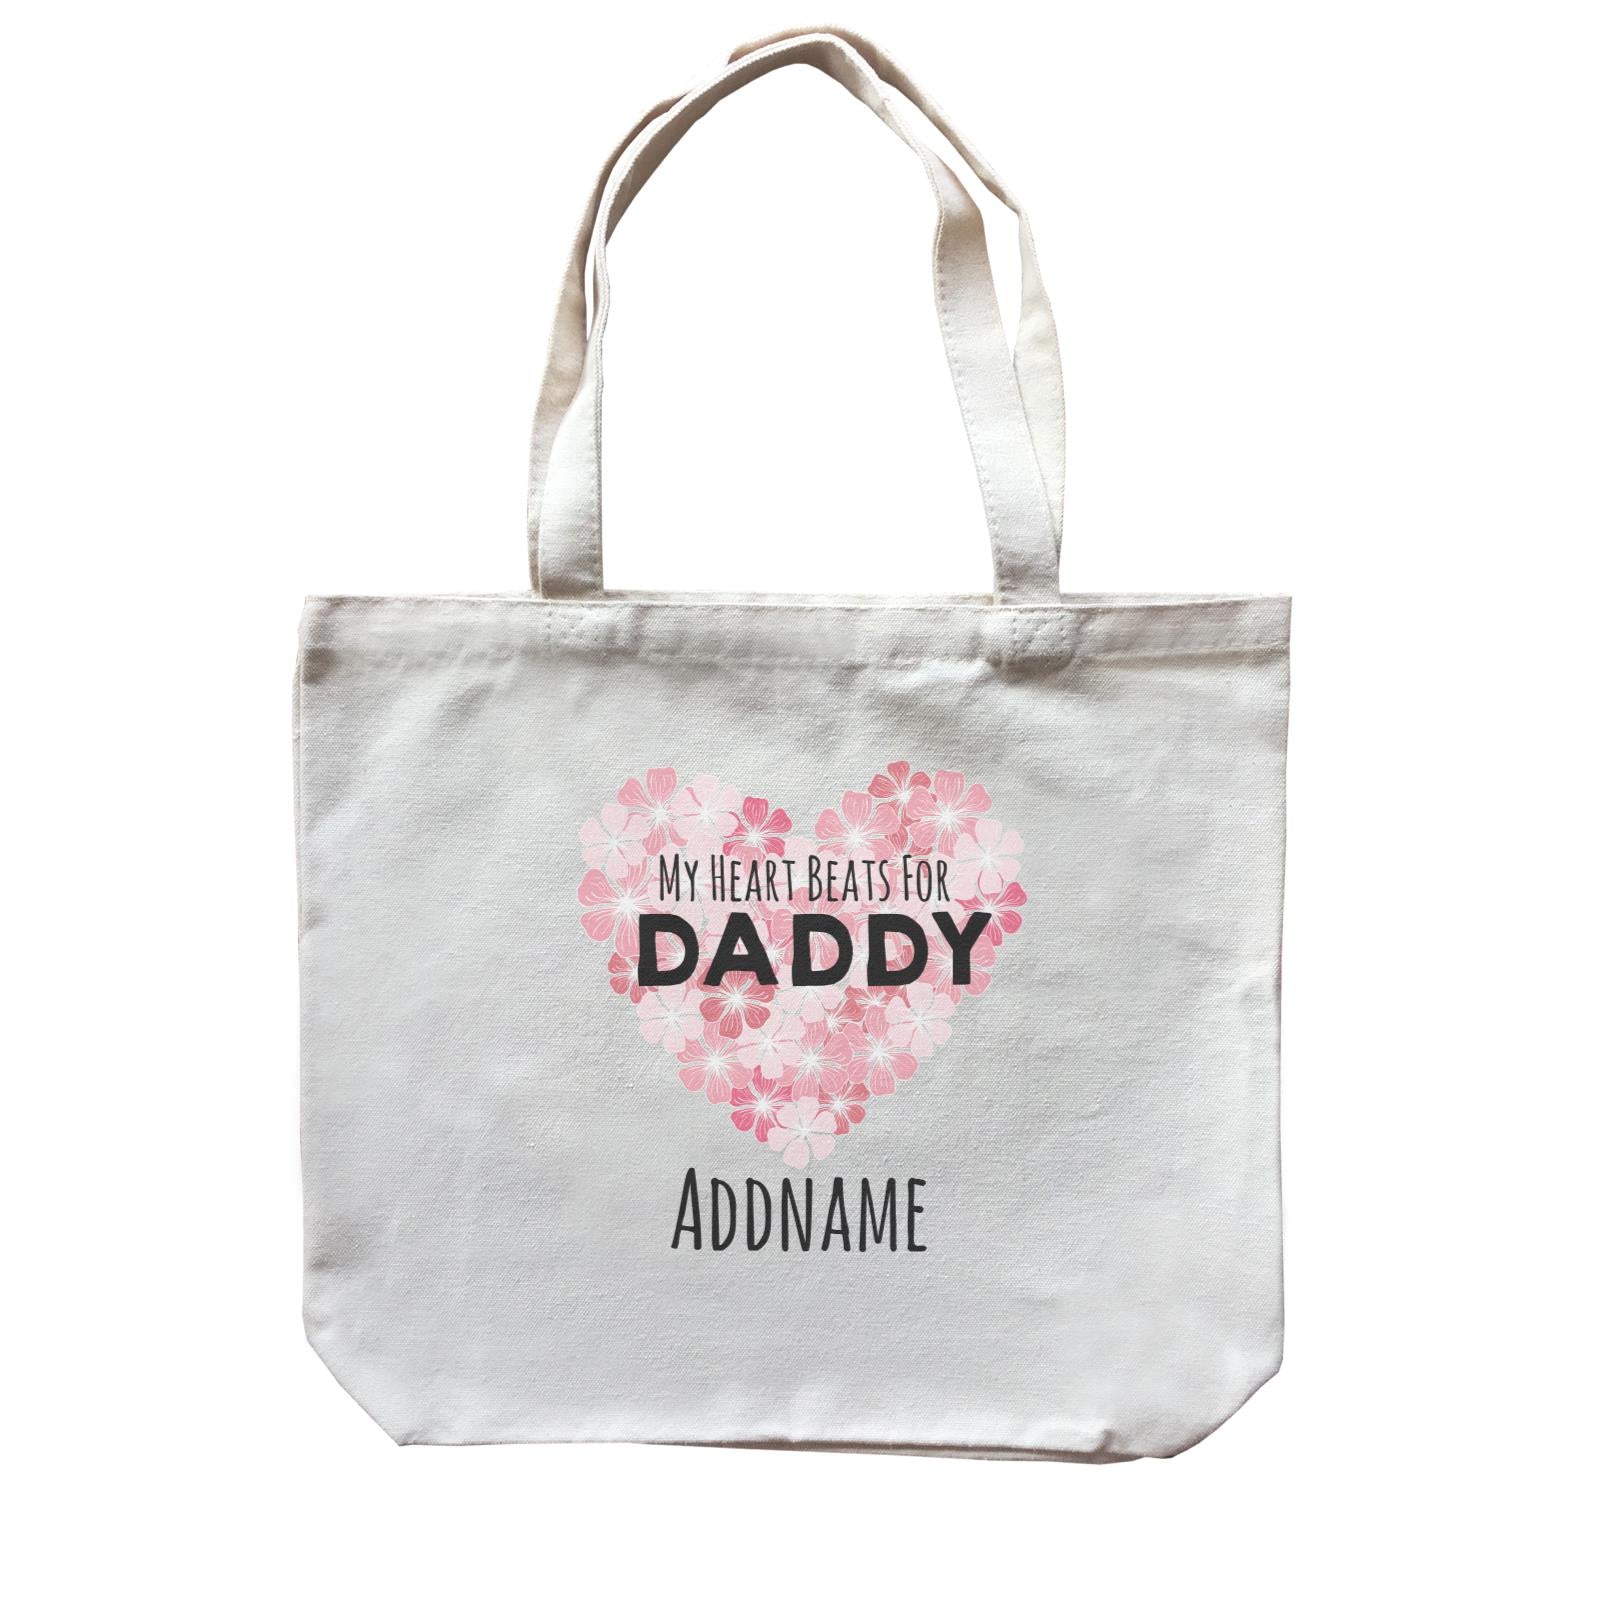 Drawn Mom & Dad Love Heart Beats for Daddy Addname Canvas Bag